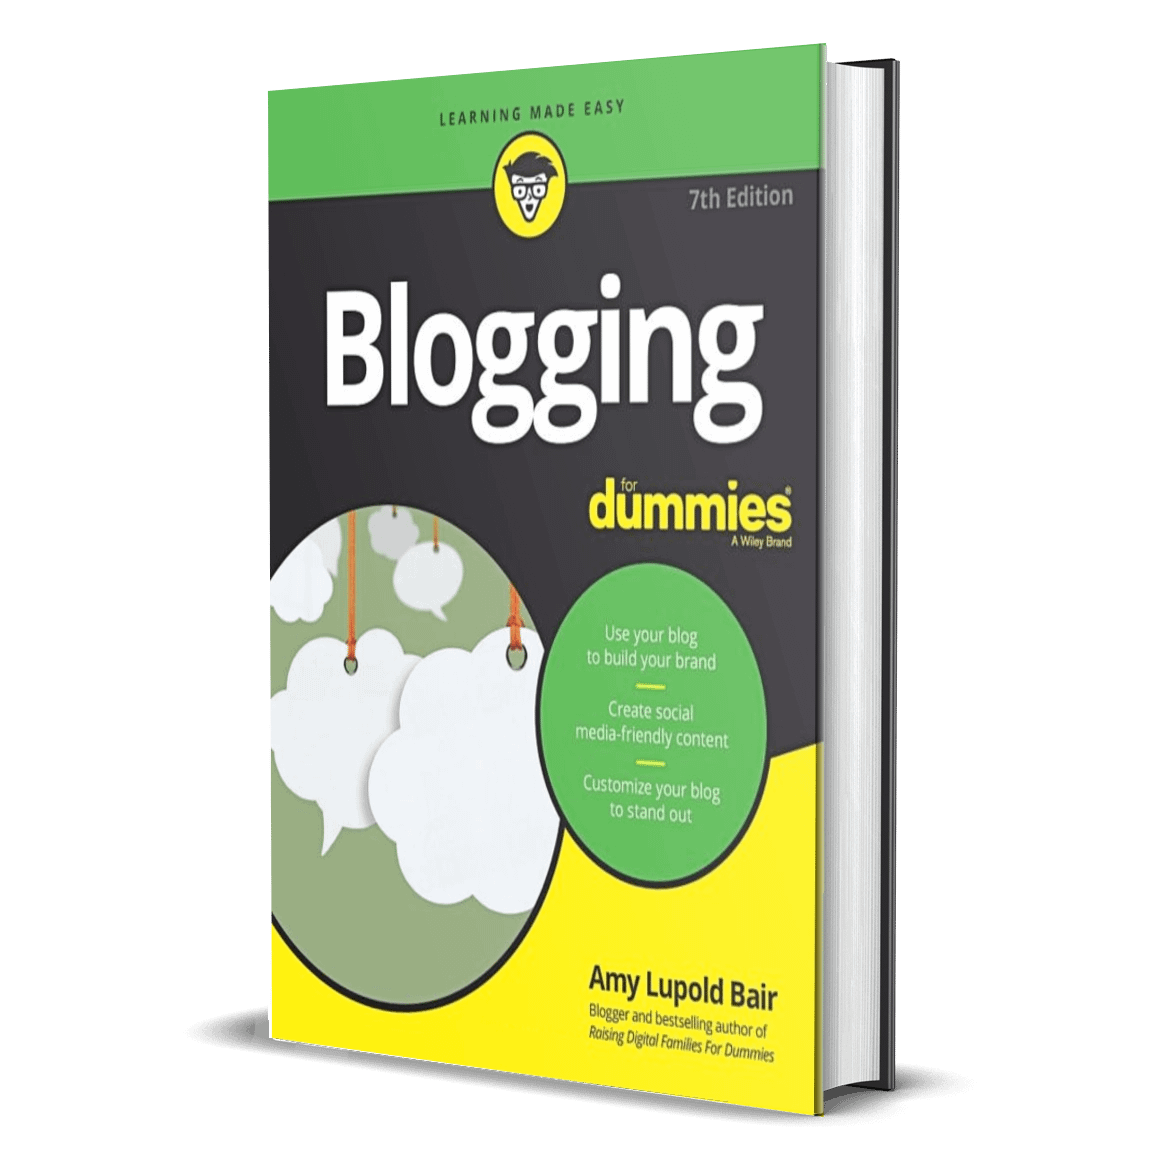 Blogging For Dummies by Amy Lupold Bair is a thorough beginner blogging book that can help you decide on which blogging platform to choose.